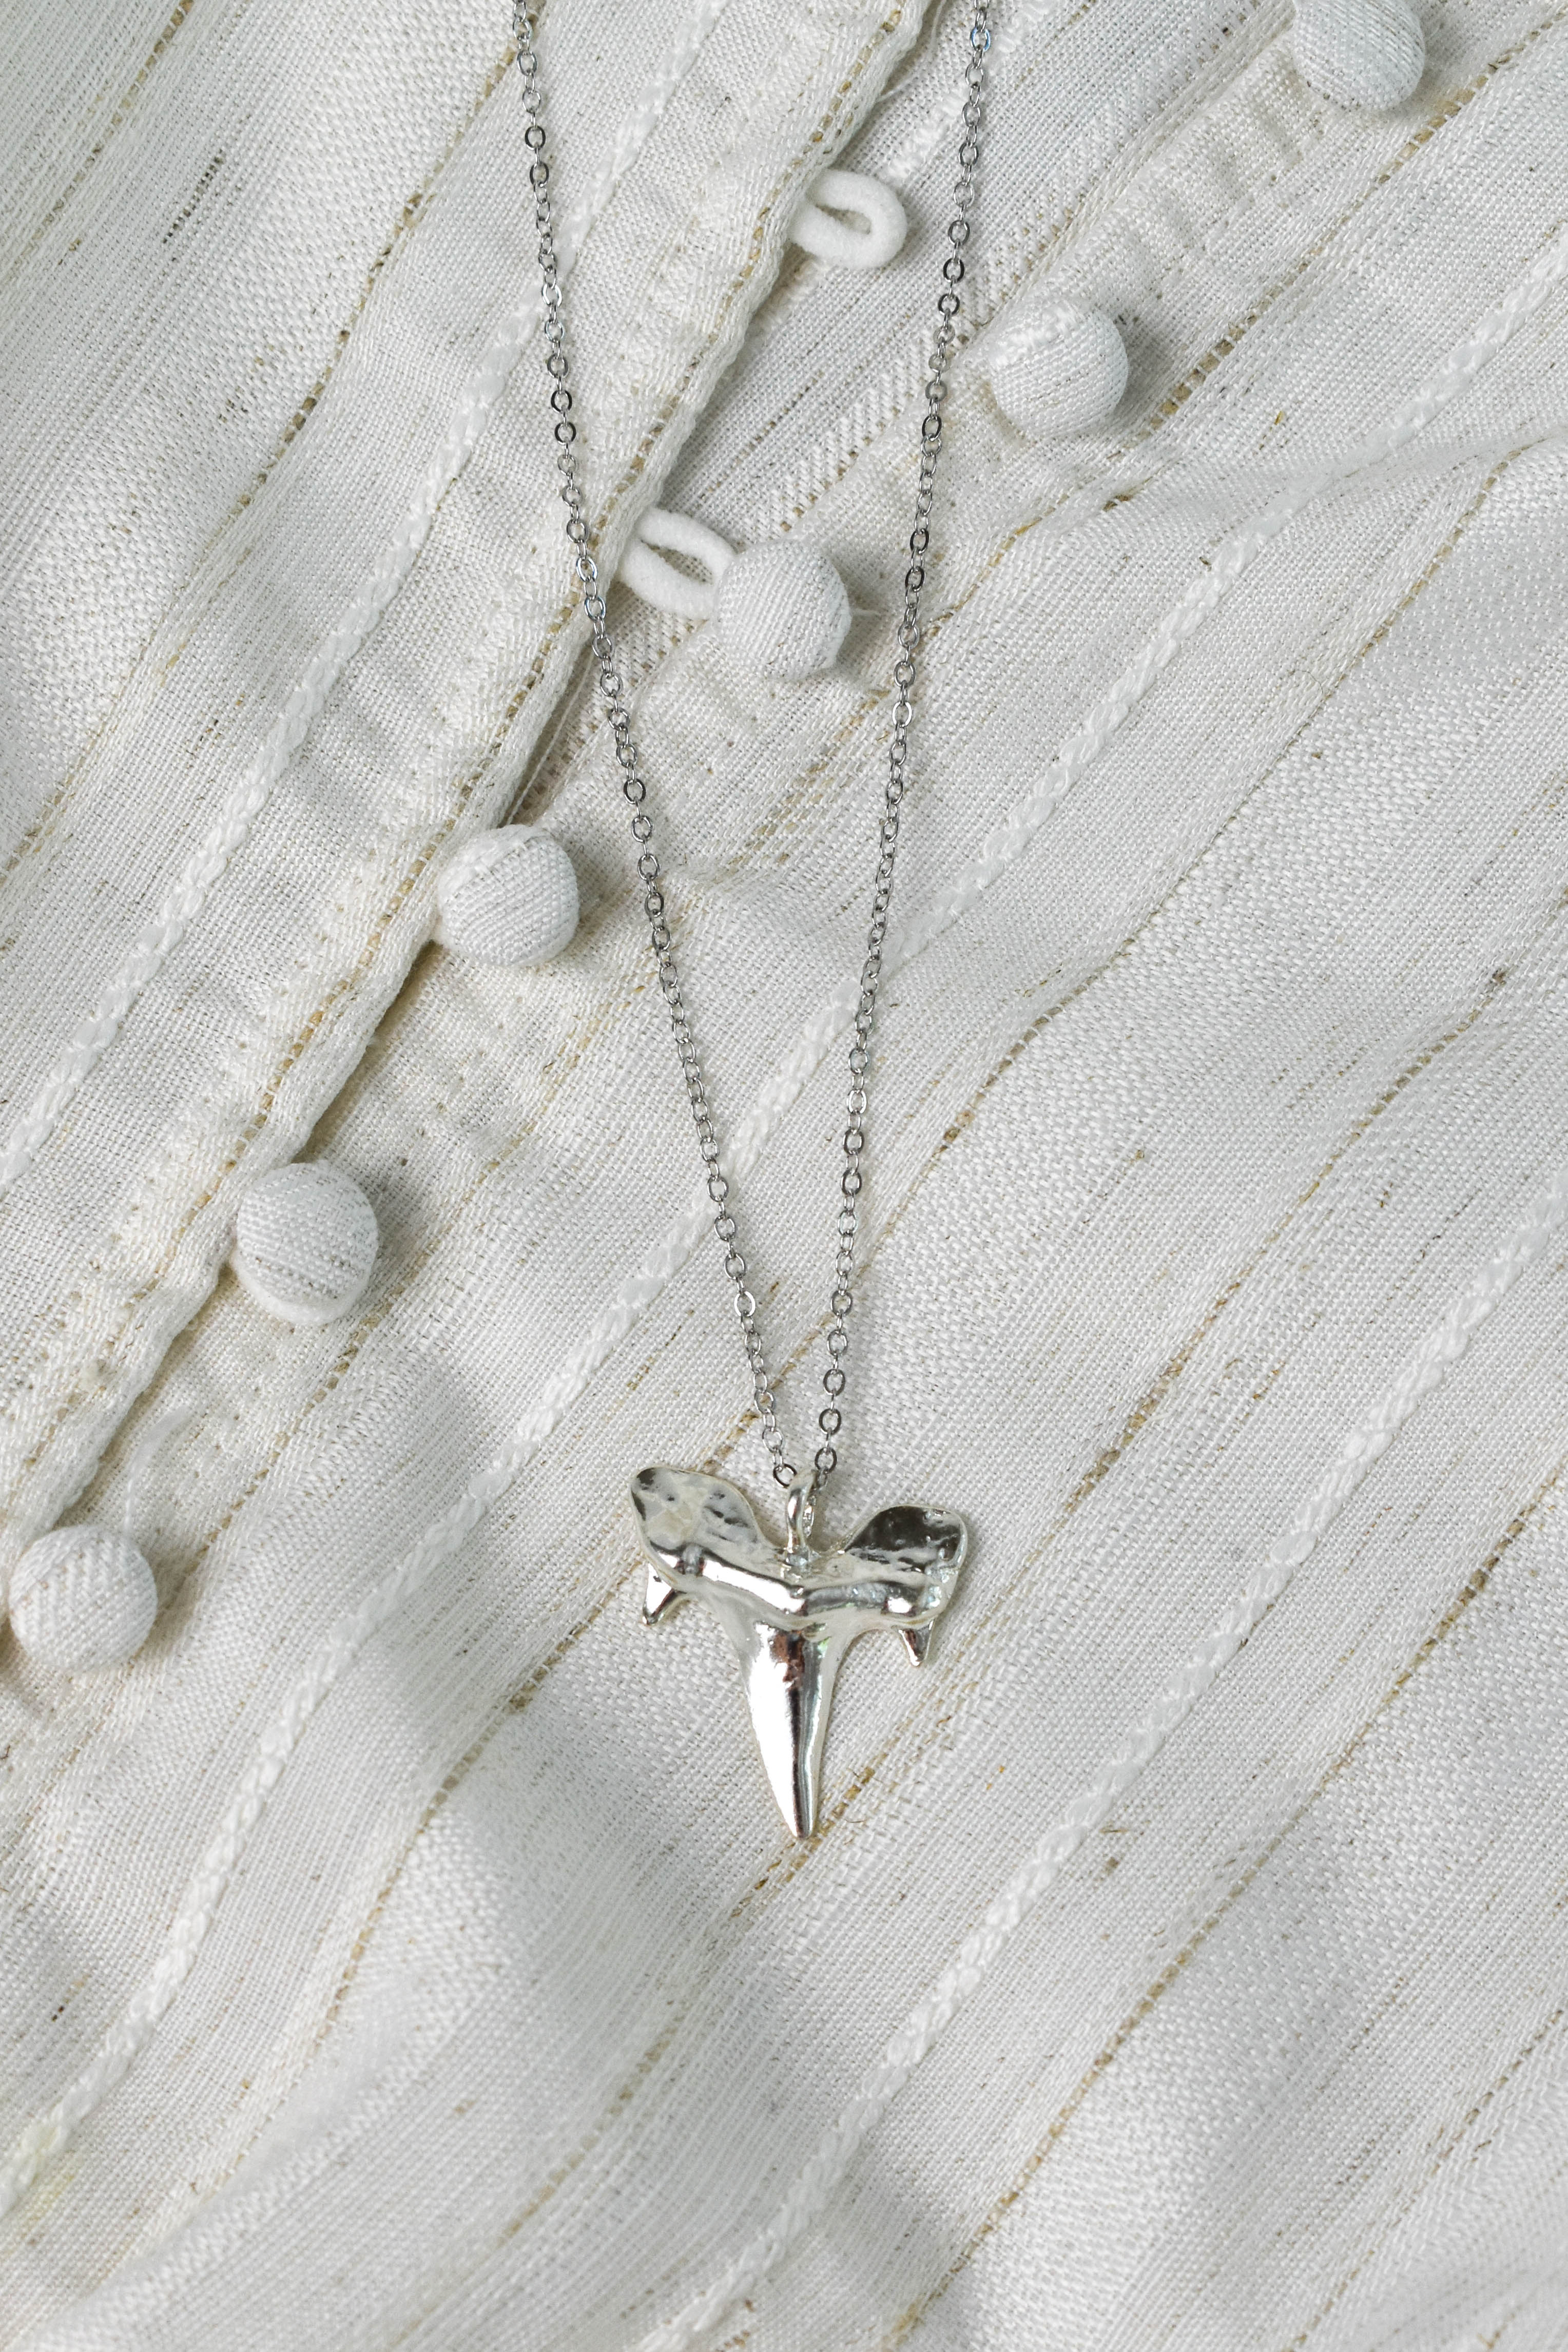 The Metal Shark Necklace - Silver